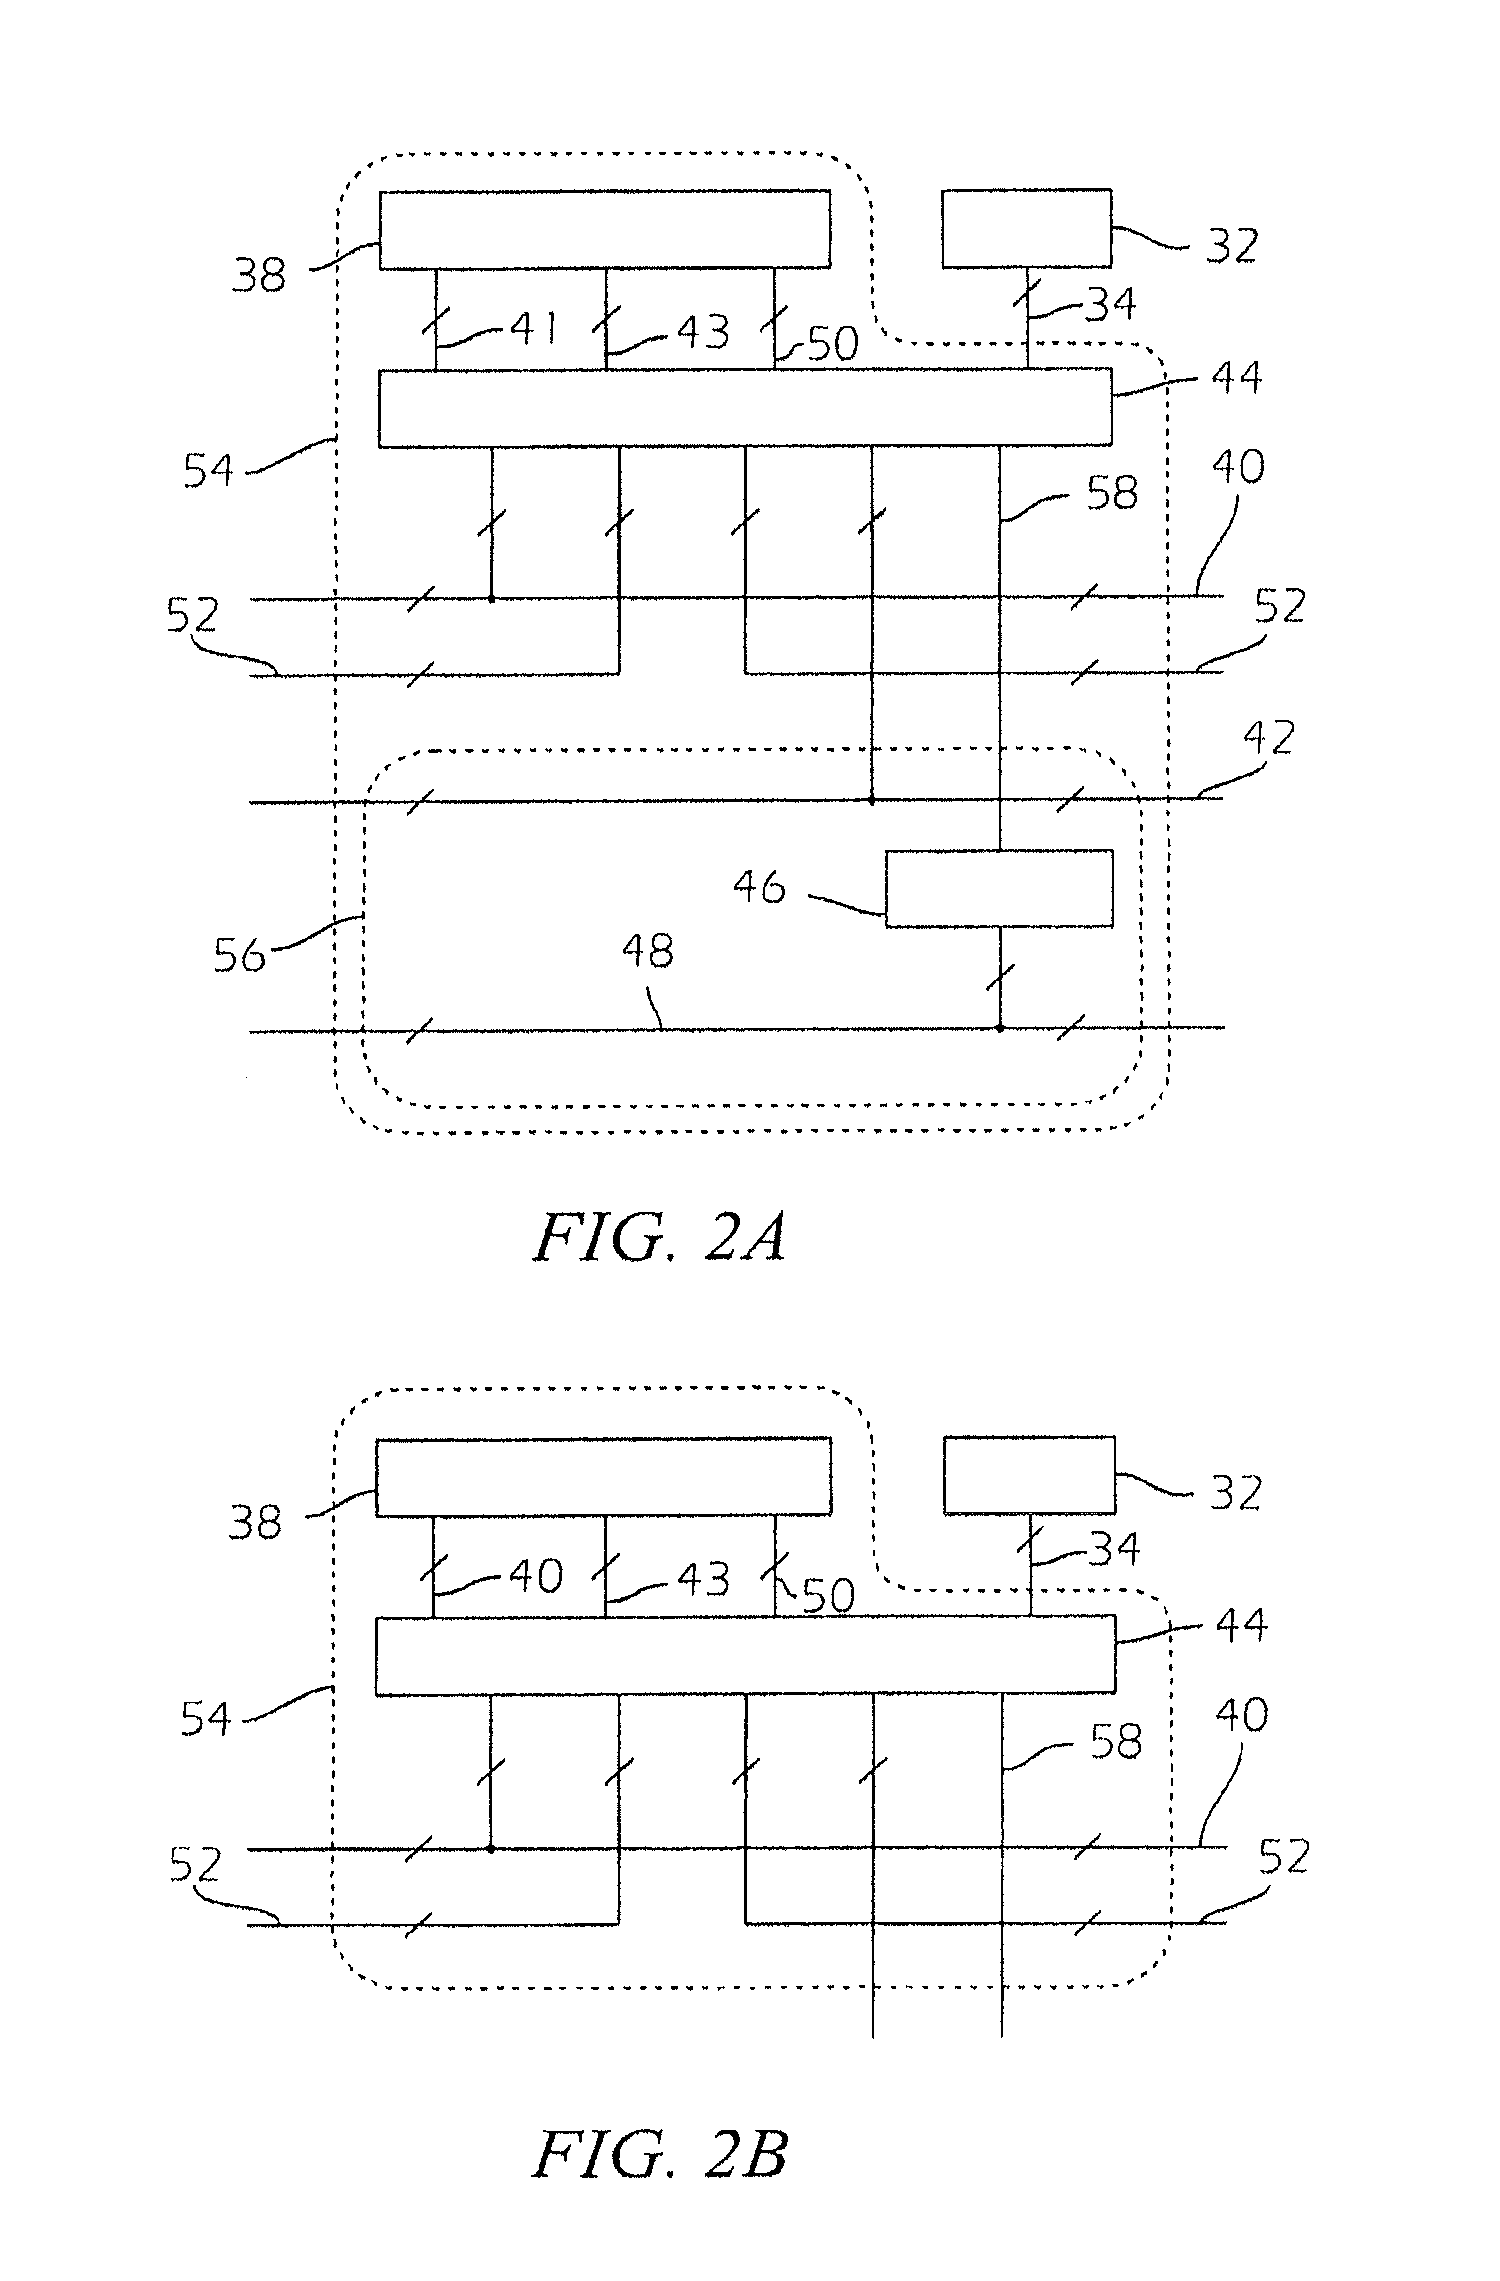 Memory based electronically scanned array antenna control